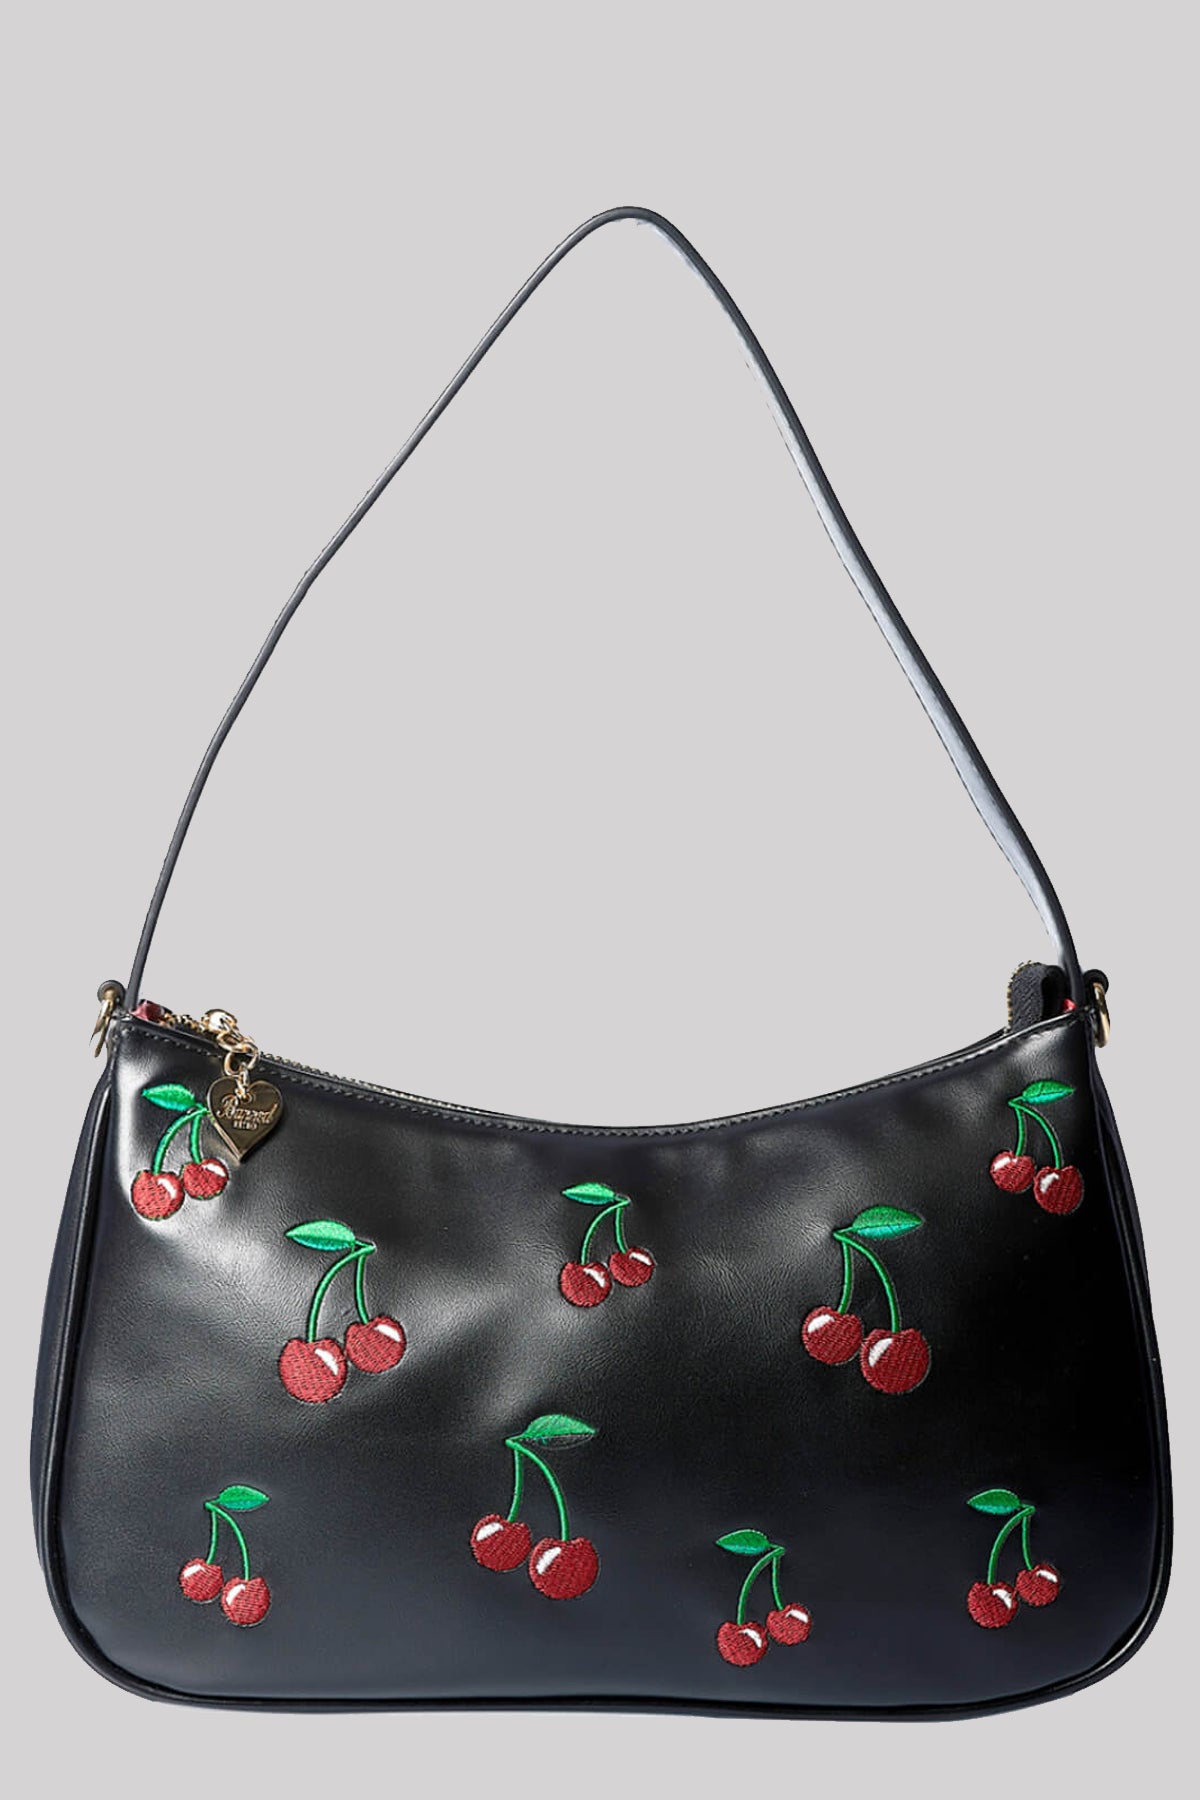 Banned Wild Cherry Embroidered Shoulder Bag, Black, One-Size